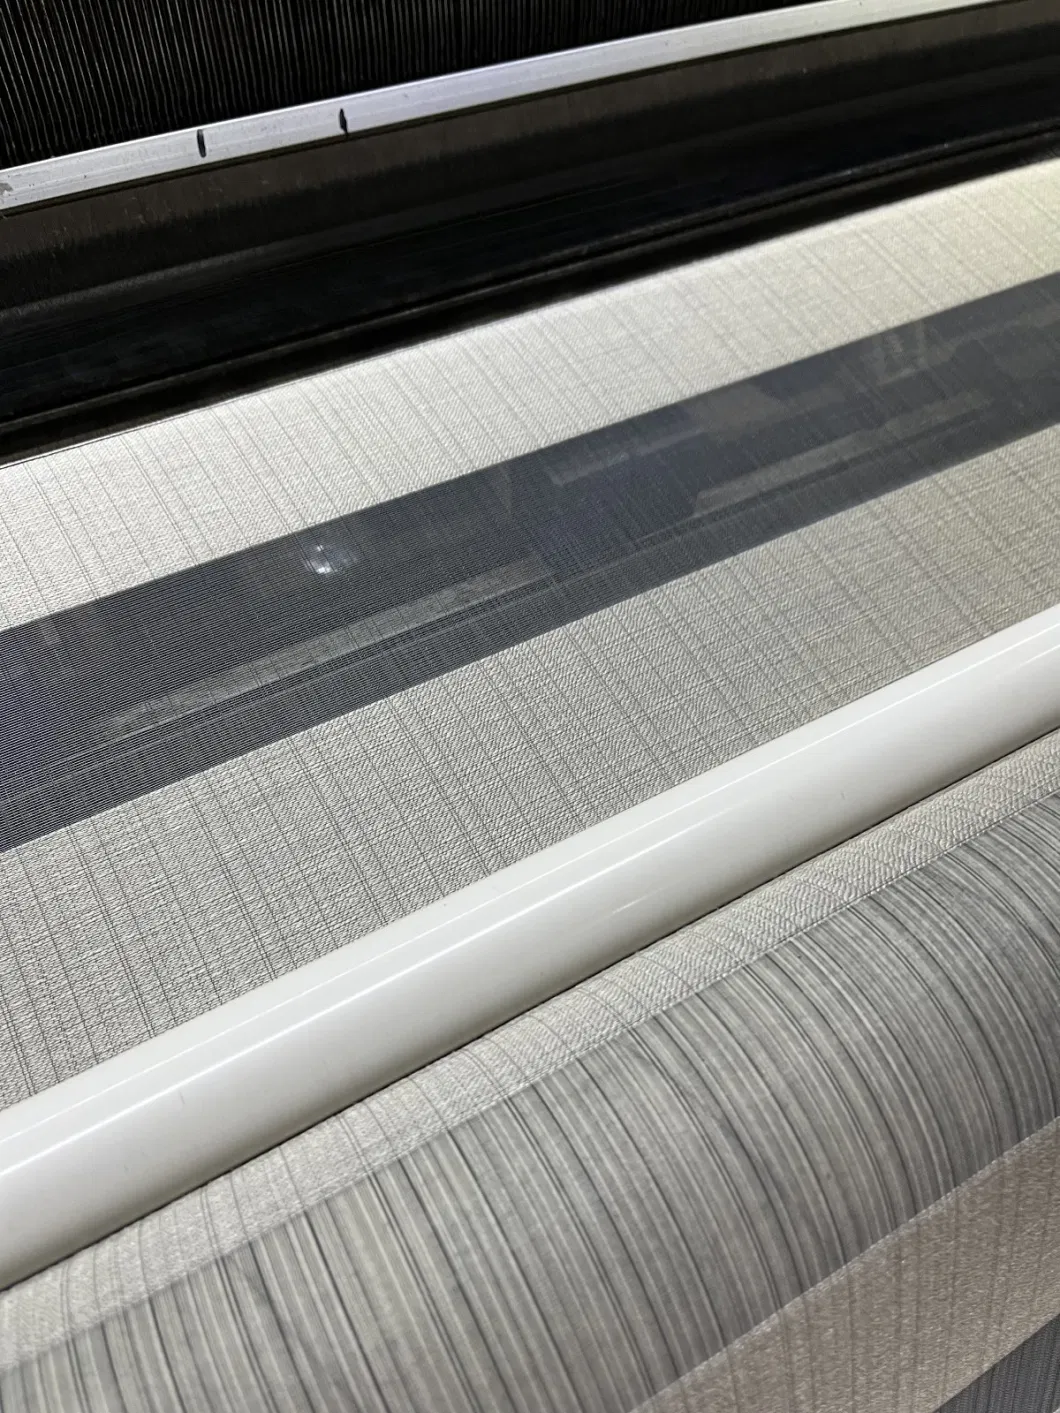 Mesh Printed Roller Blinds, Double Roll up Roll Down Window Blinds Shades